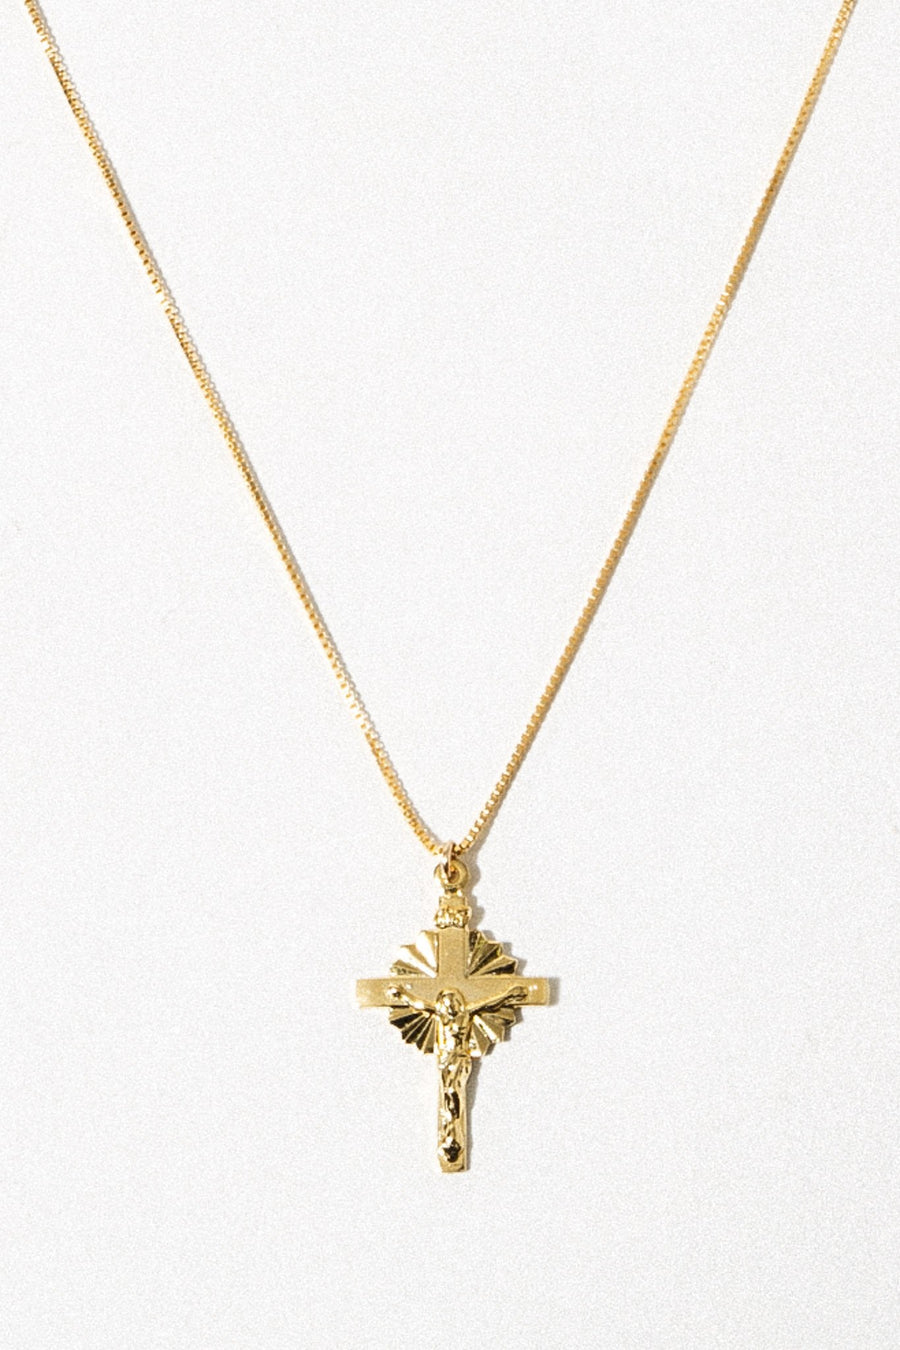 Gempacked Jewelry Son of Man Necklace